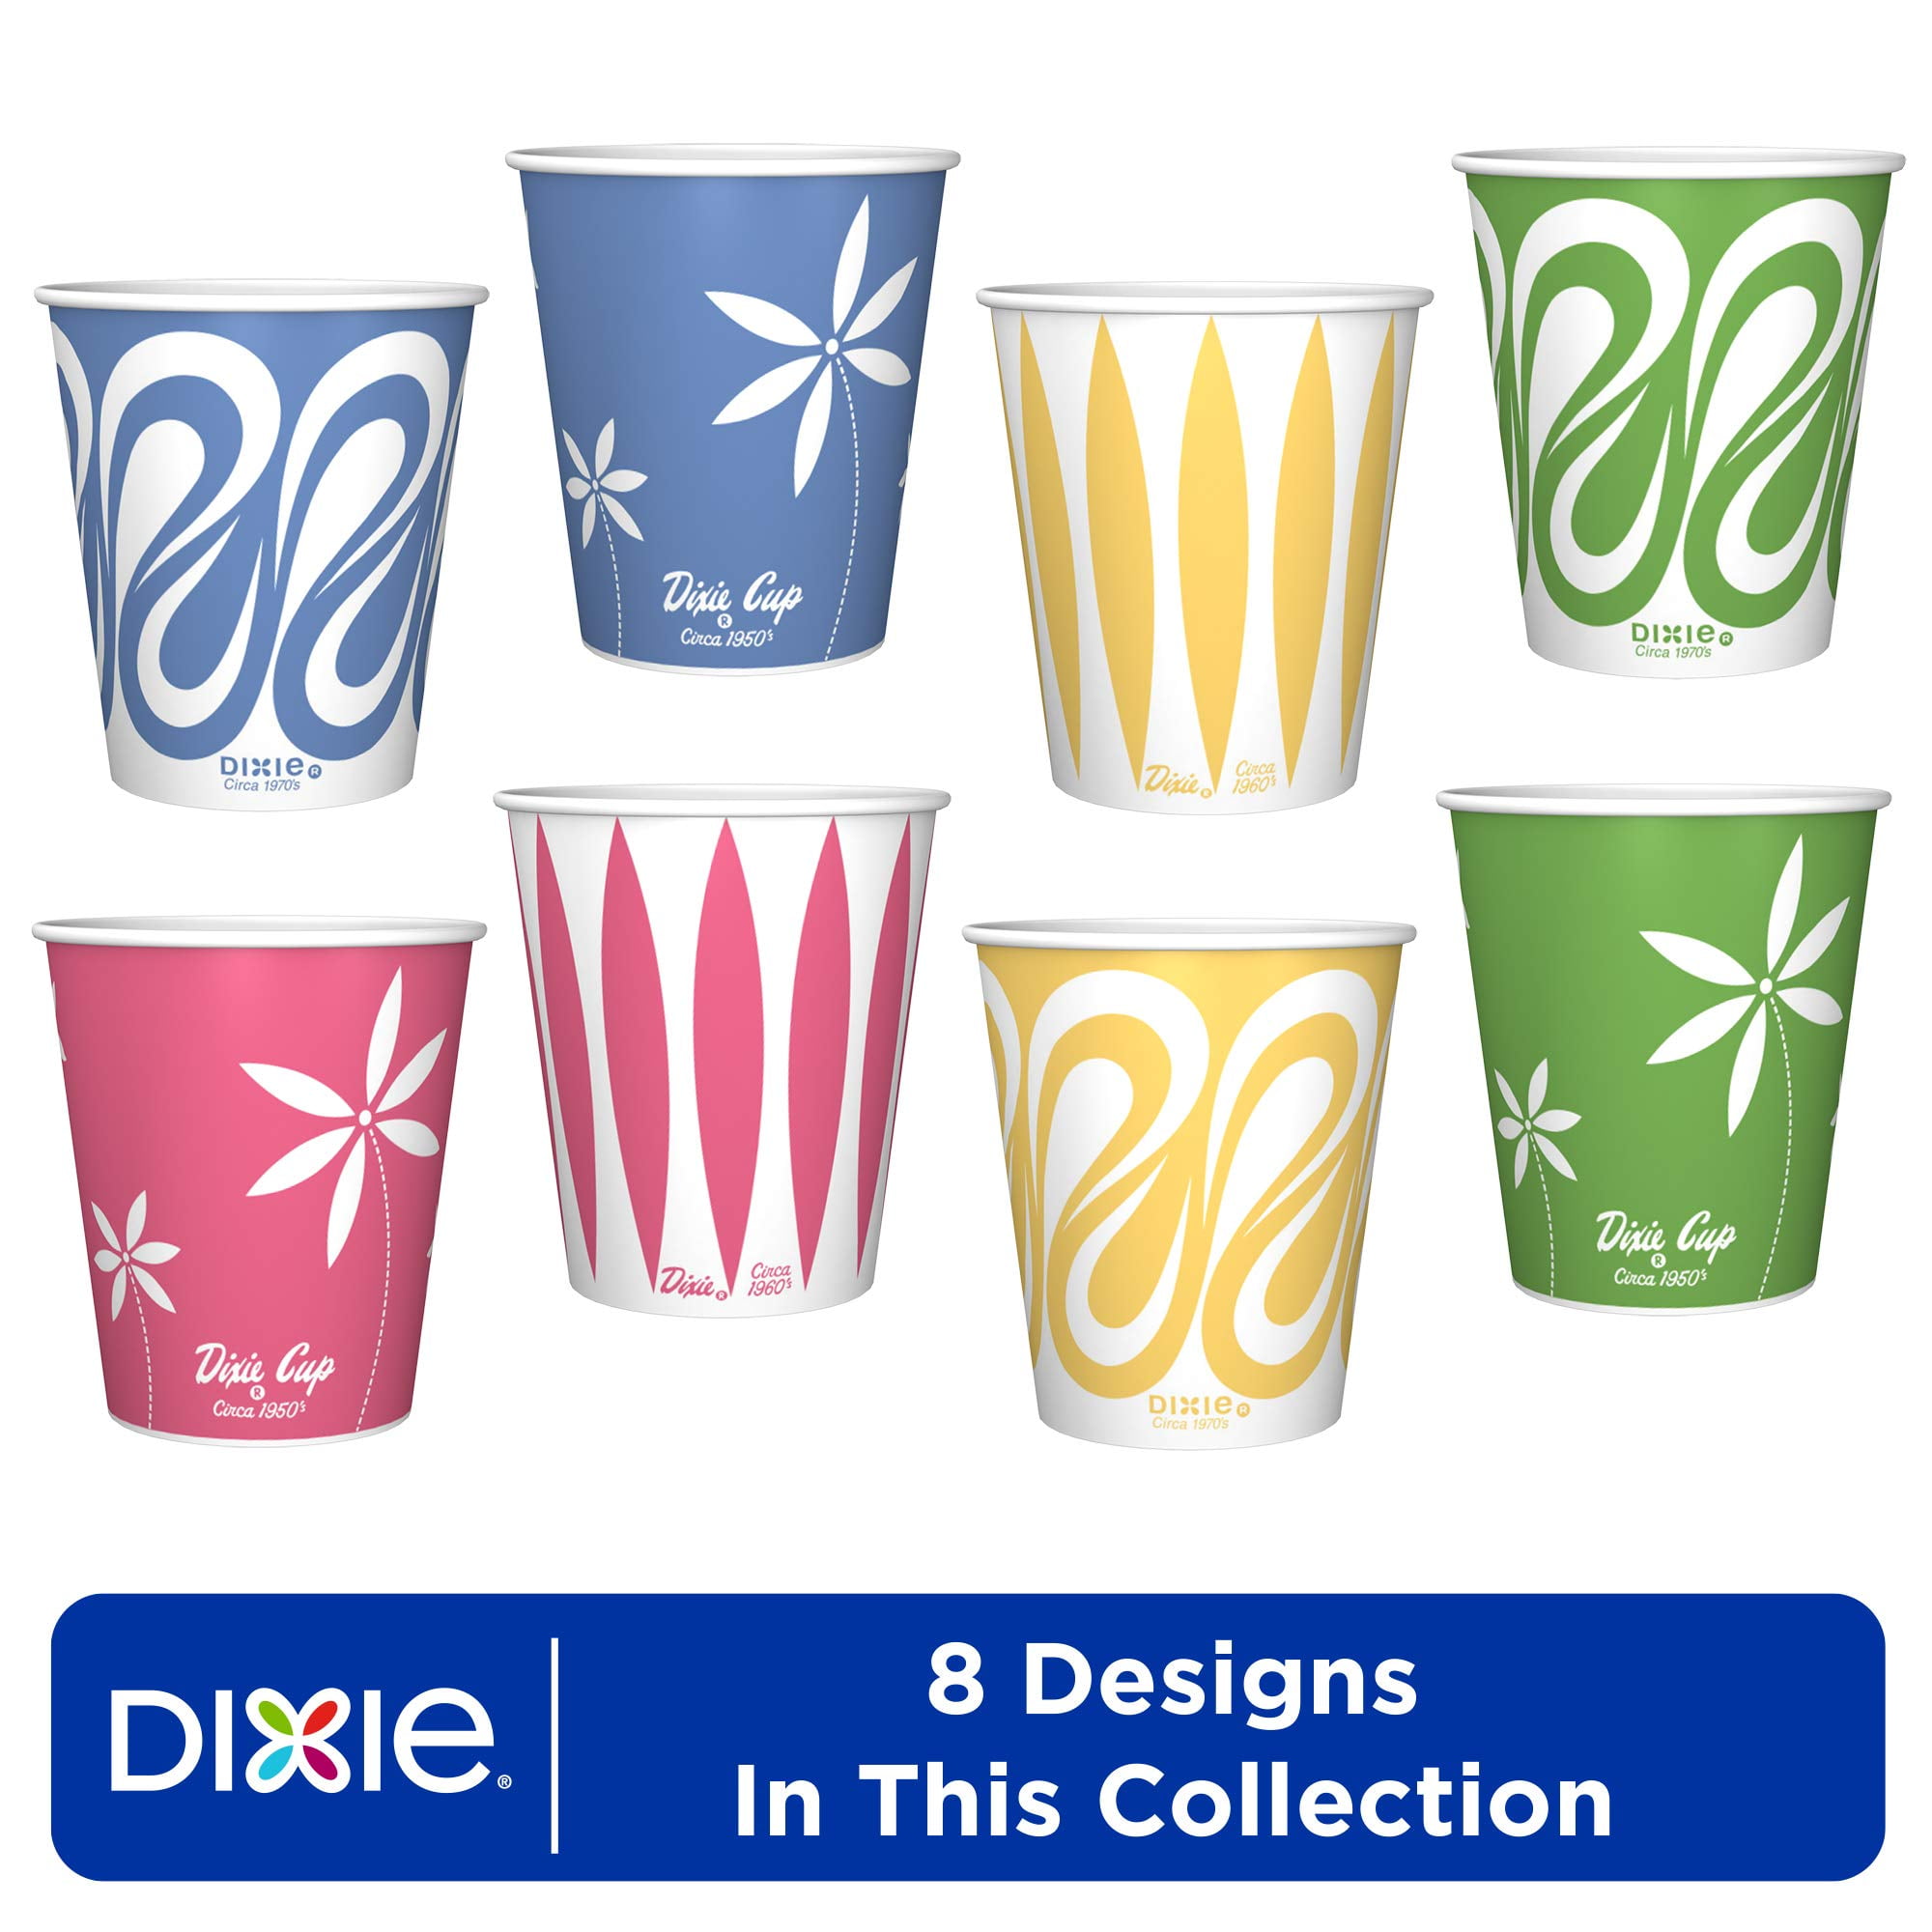 V: “A Dixie for Every Need” – The Diffusion of the Paper Cup